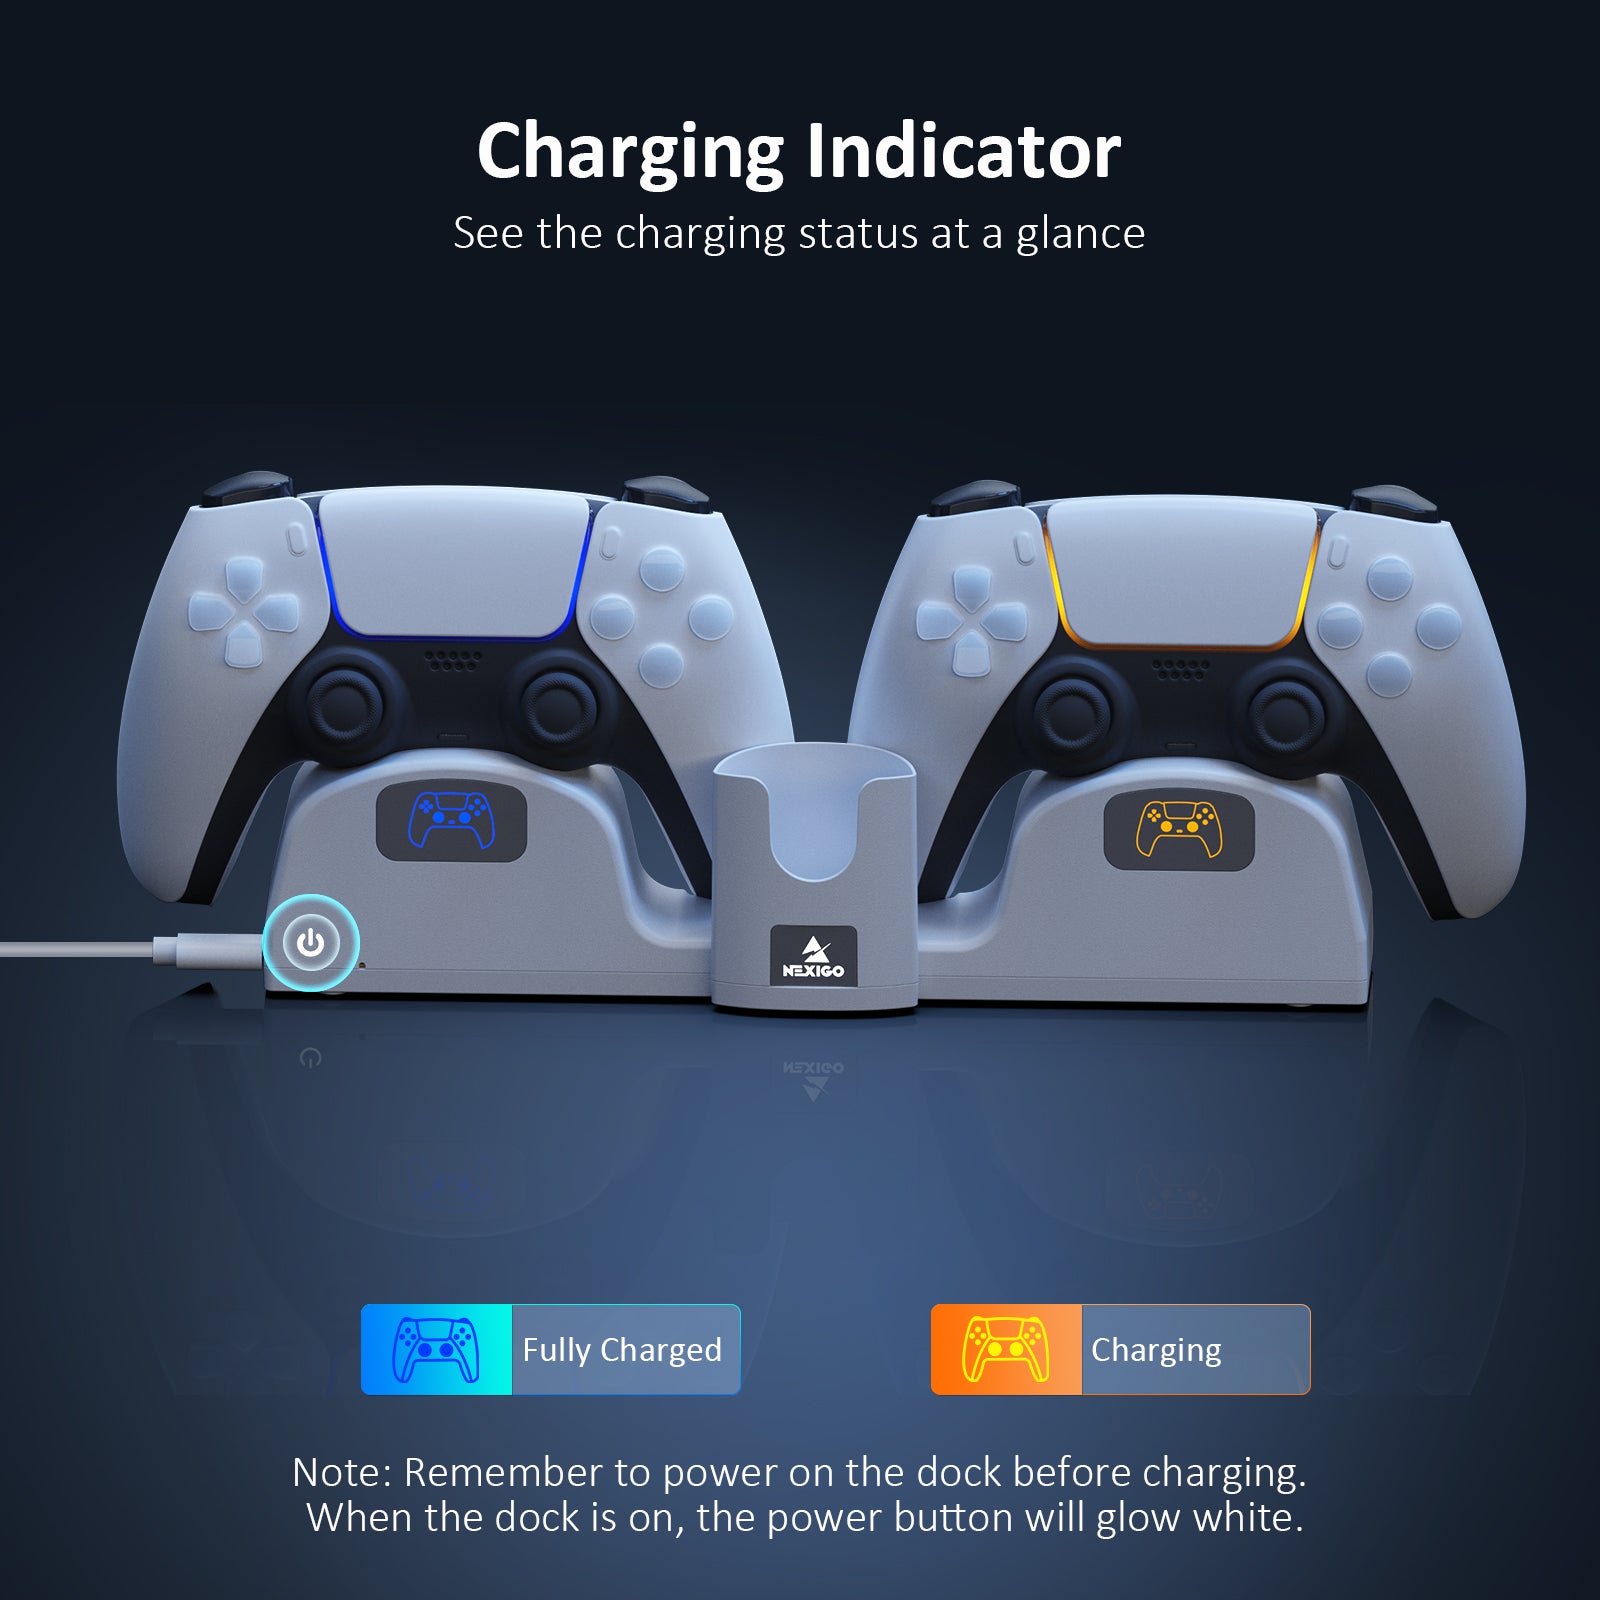 Easily see the charging status at a glance with the Indicator, orange light while charging, blue light after fully charged